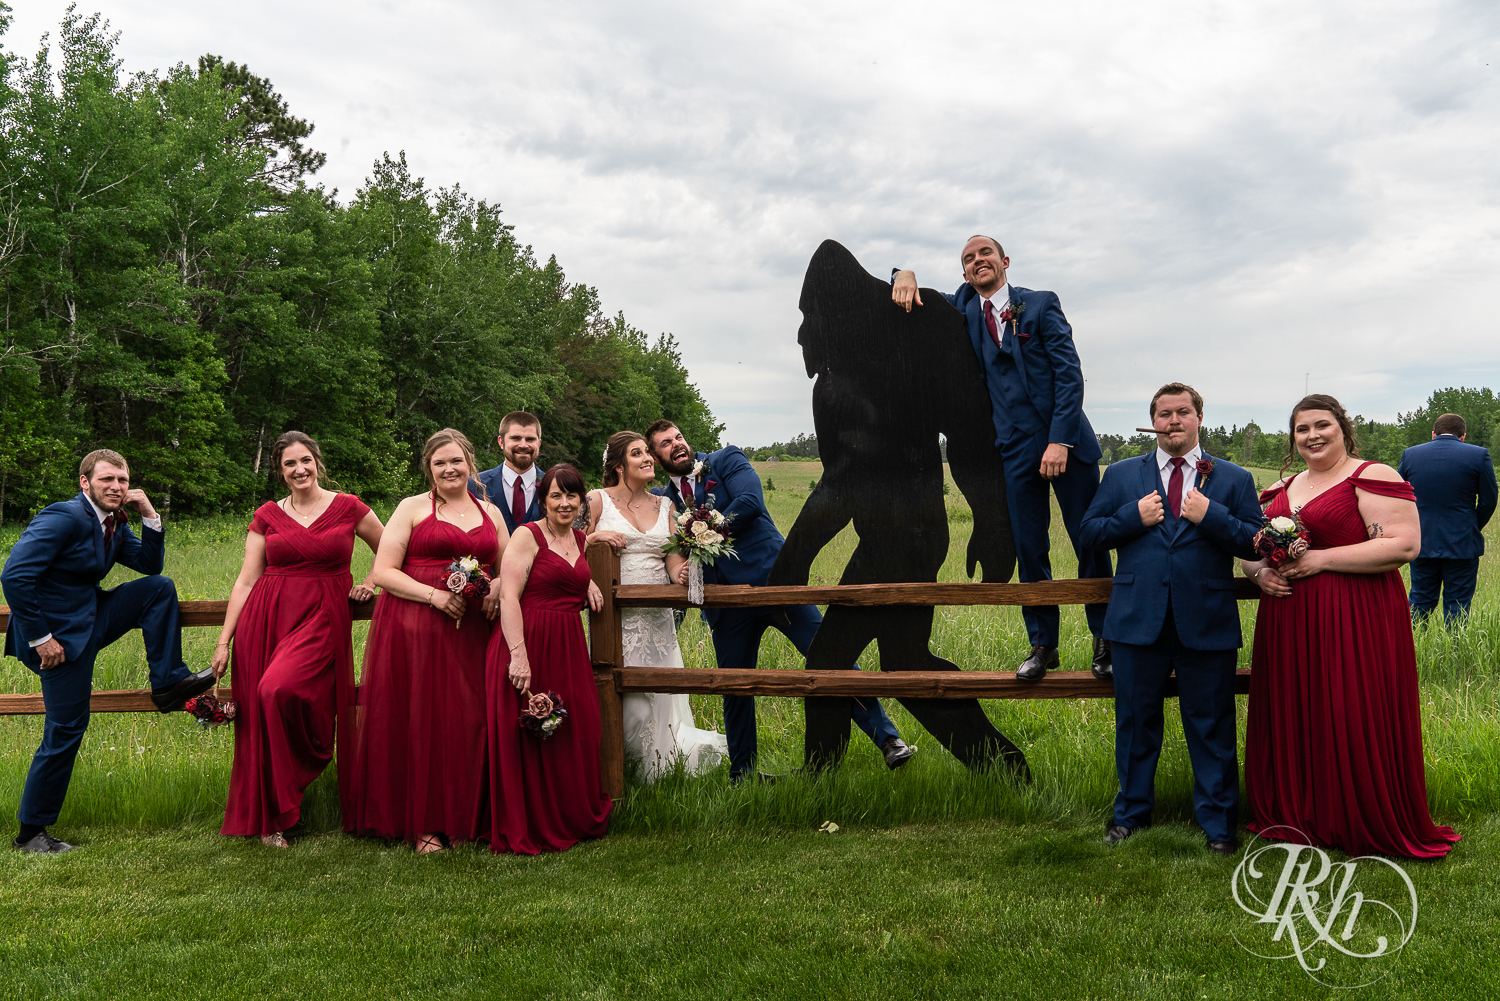 Wedding party in red dresses and blue suits pose with Bigfoot at Pine Peaks Event Center in Pine River, Minnesota.